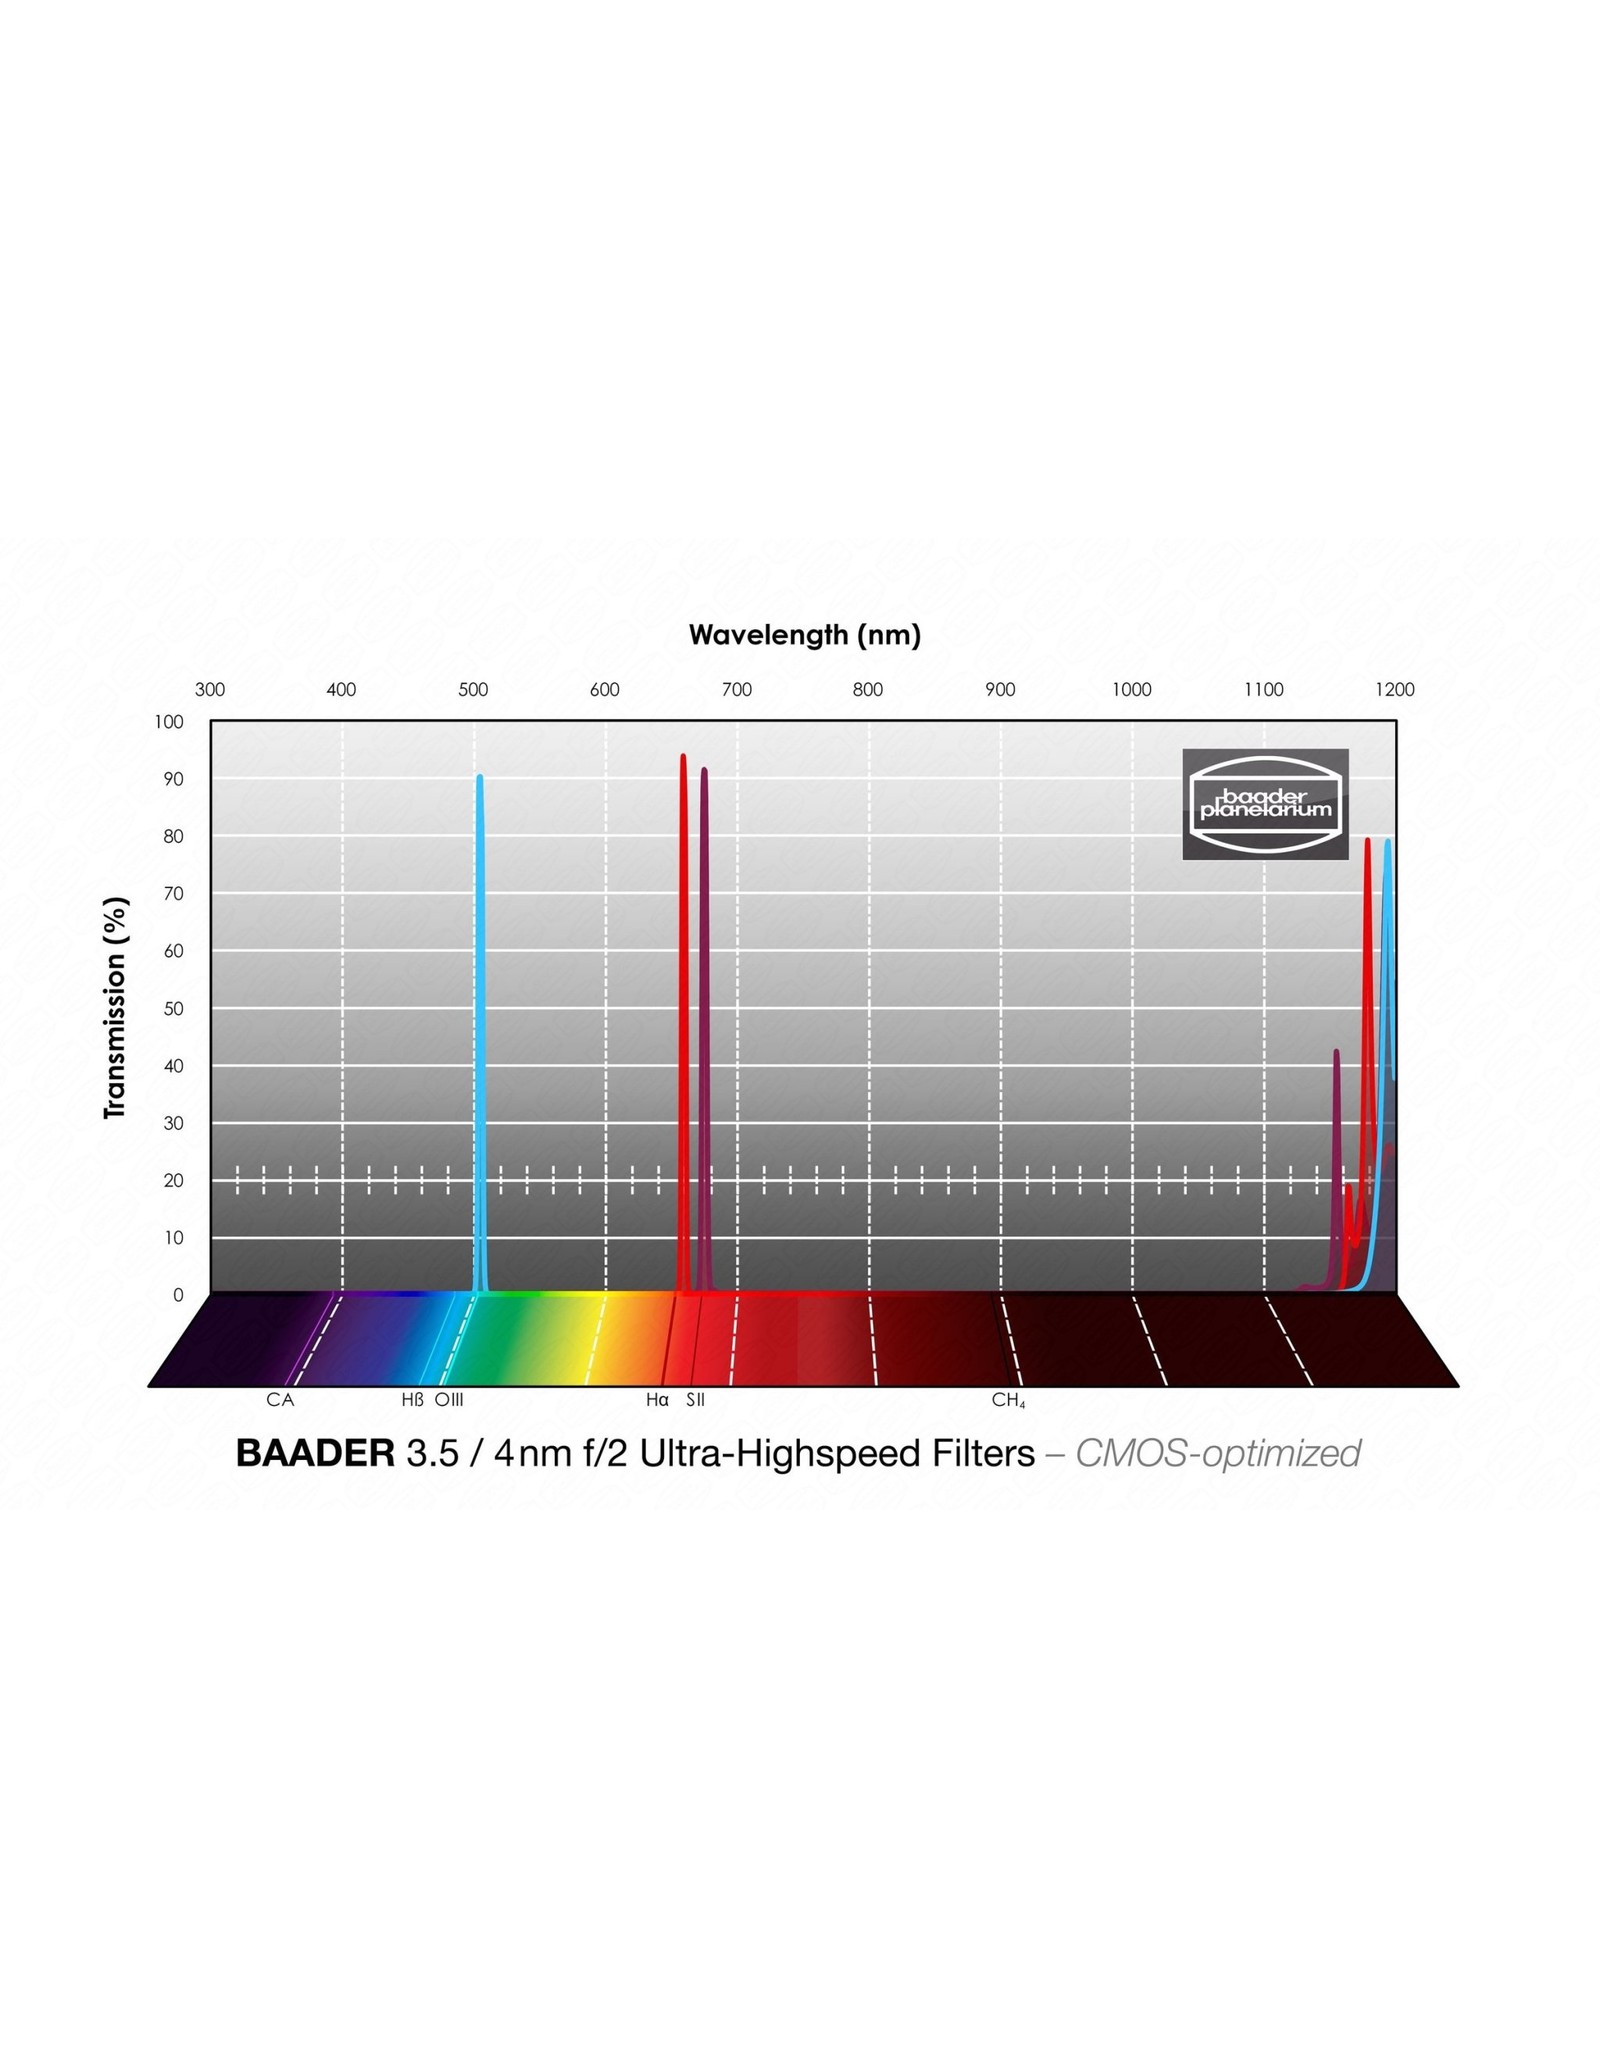 Baader Planetarium Baader 3.5nm f/2 Ultra-Highspeed H-Alpha Filters – CMOS-optimized (Specify Size)